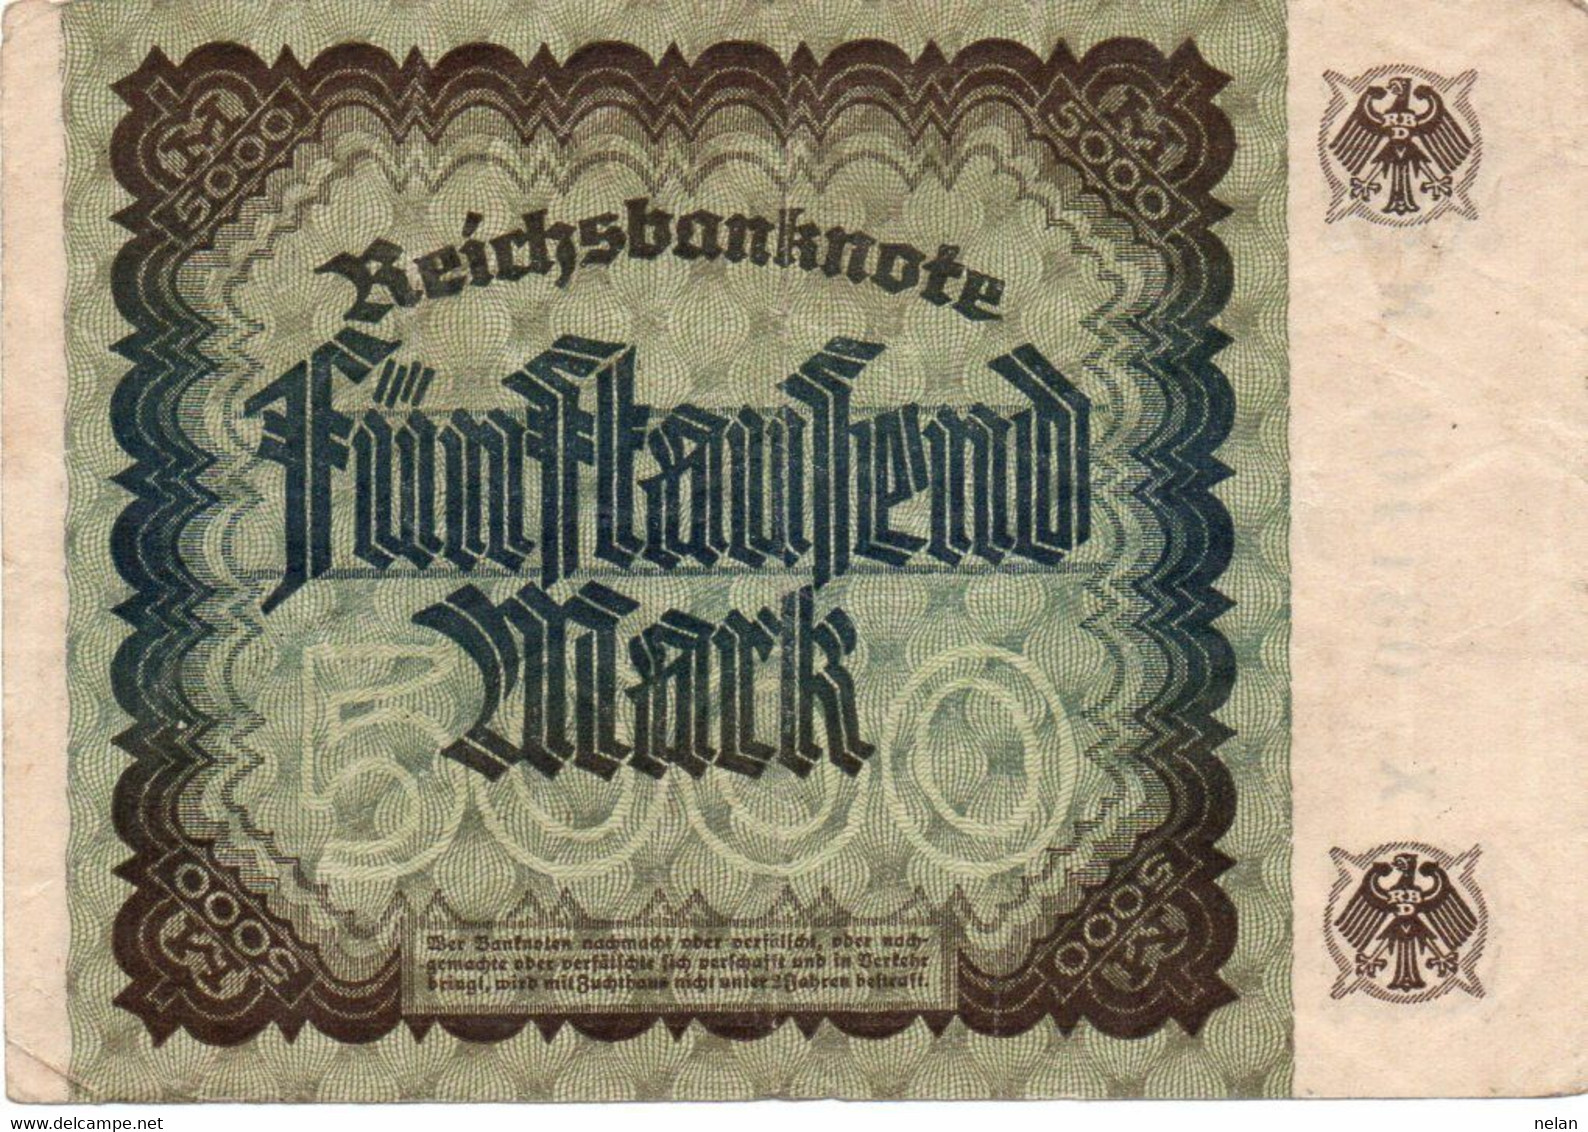 GERMANY- 5000 MARK 1922 - Wor:P-81a, Ros:R-80a - Circ -Hakensterne - 5.000 Mark